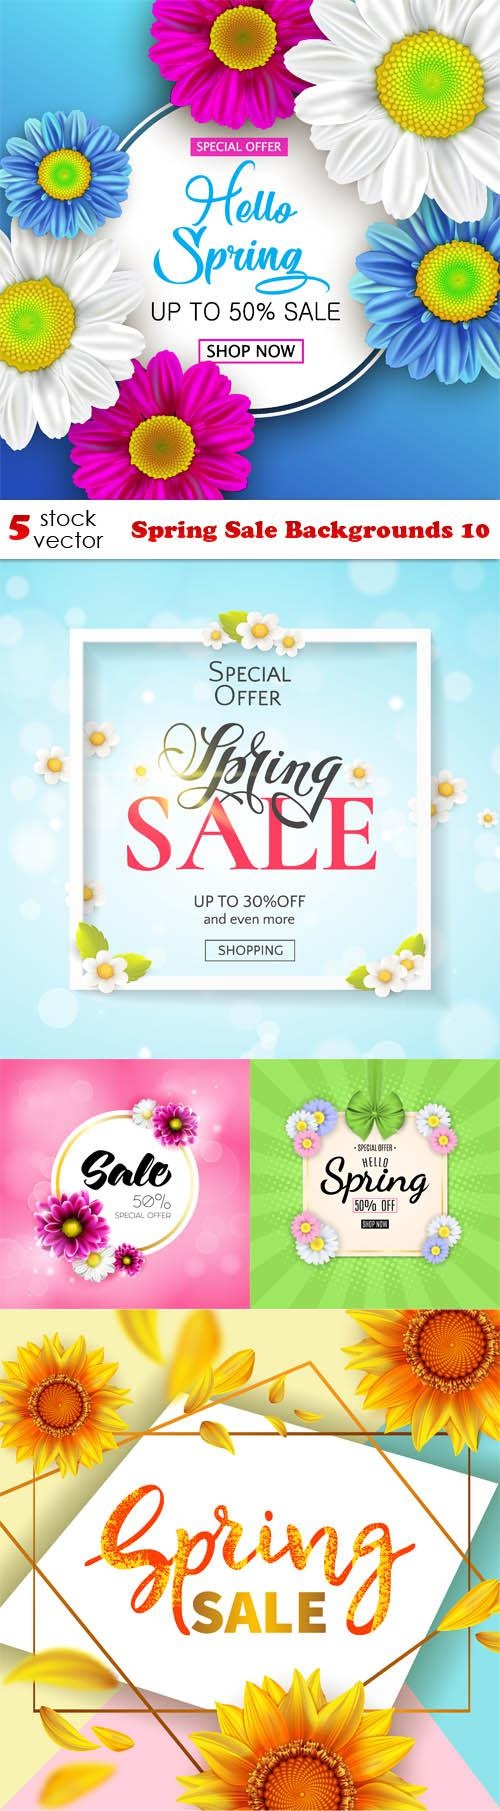 Spring Sale Backgrounds 10 ((aitff - 2 (7 files)